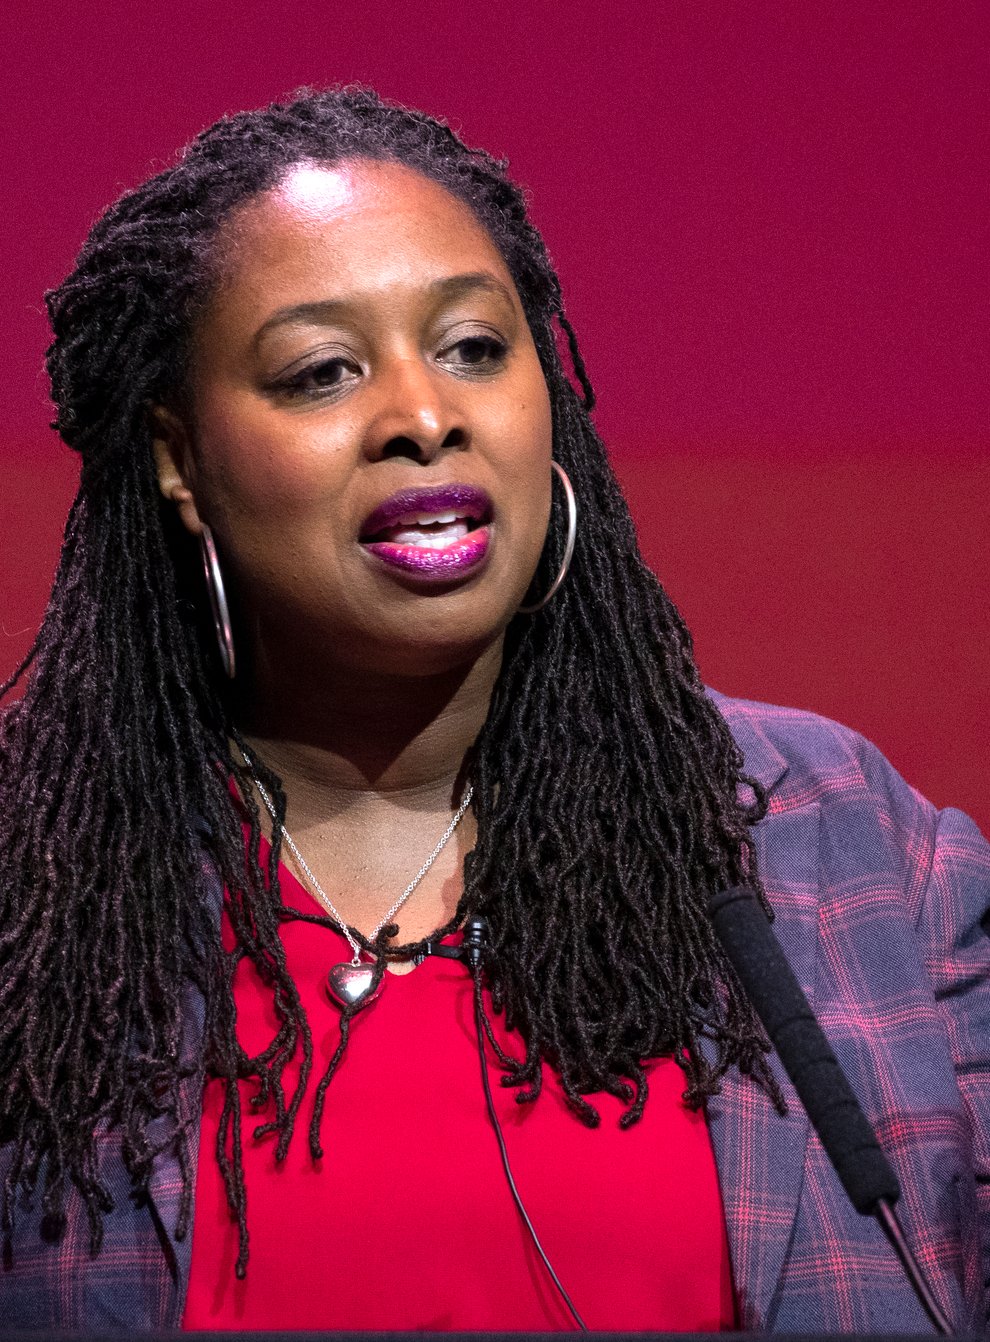 Dawn Butler accused officers of racial profiling in stopping the car in which she was travelling on Sunday 